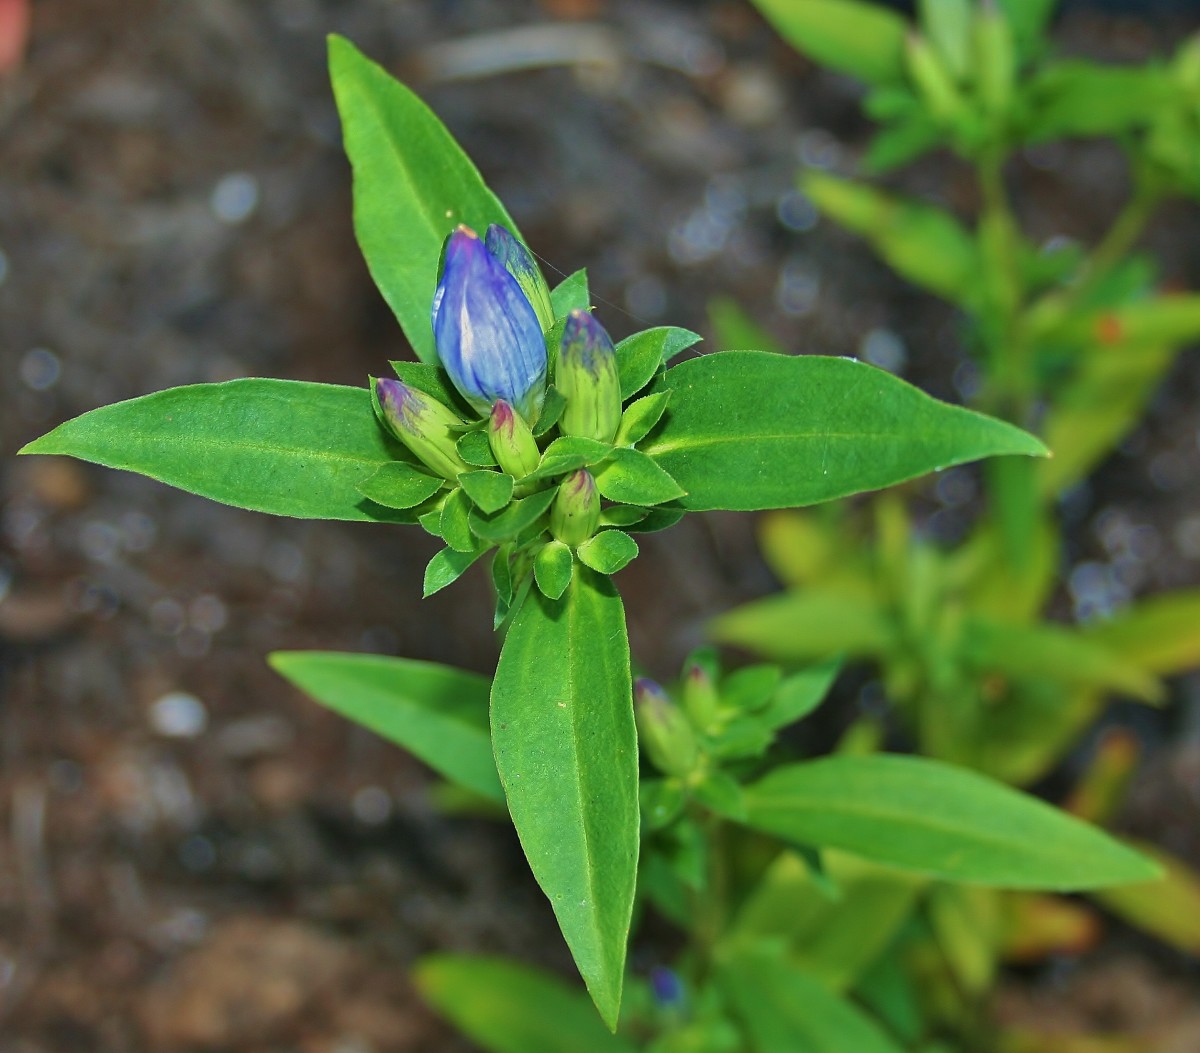 The latest addition to our garden, Appalachian gentian or Southern Mountain gentian, produces showy blue flowers in late summer through early fall.